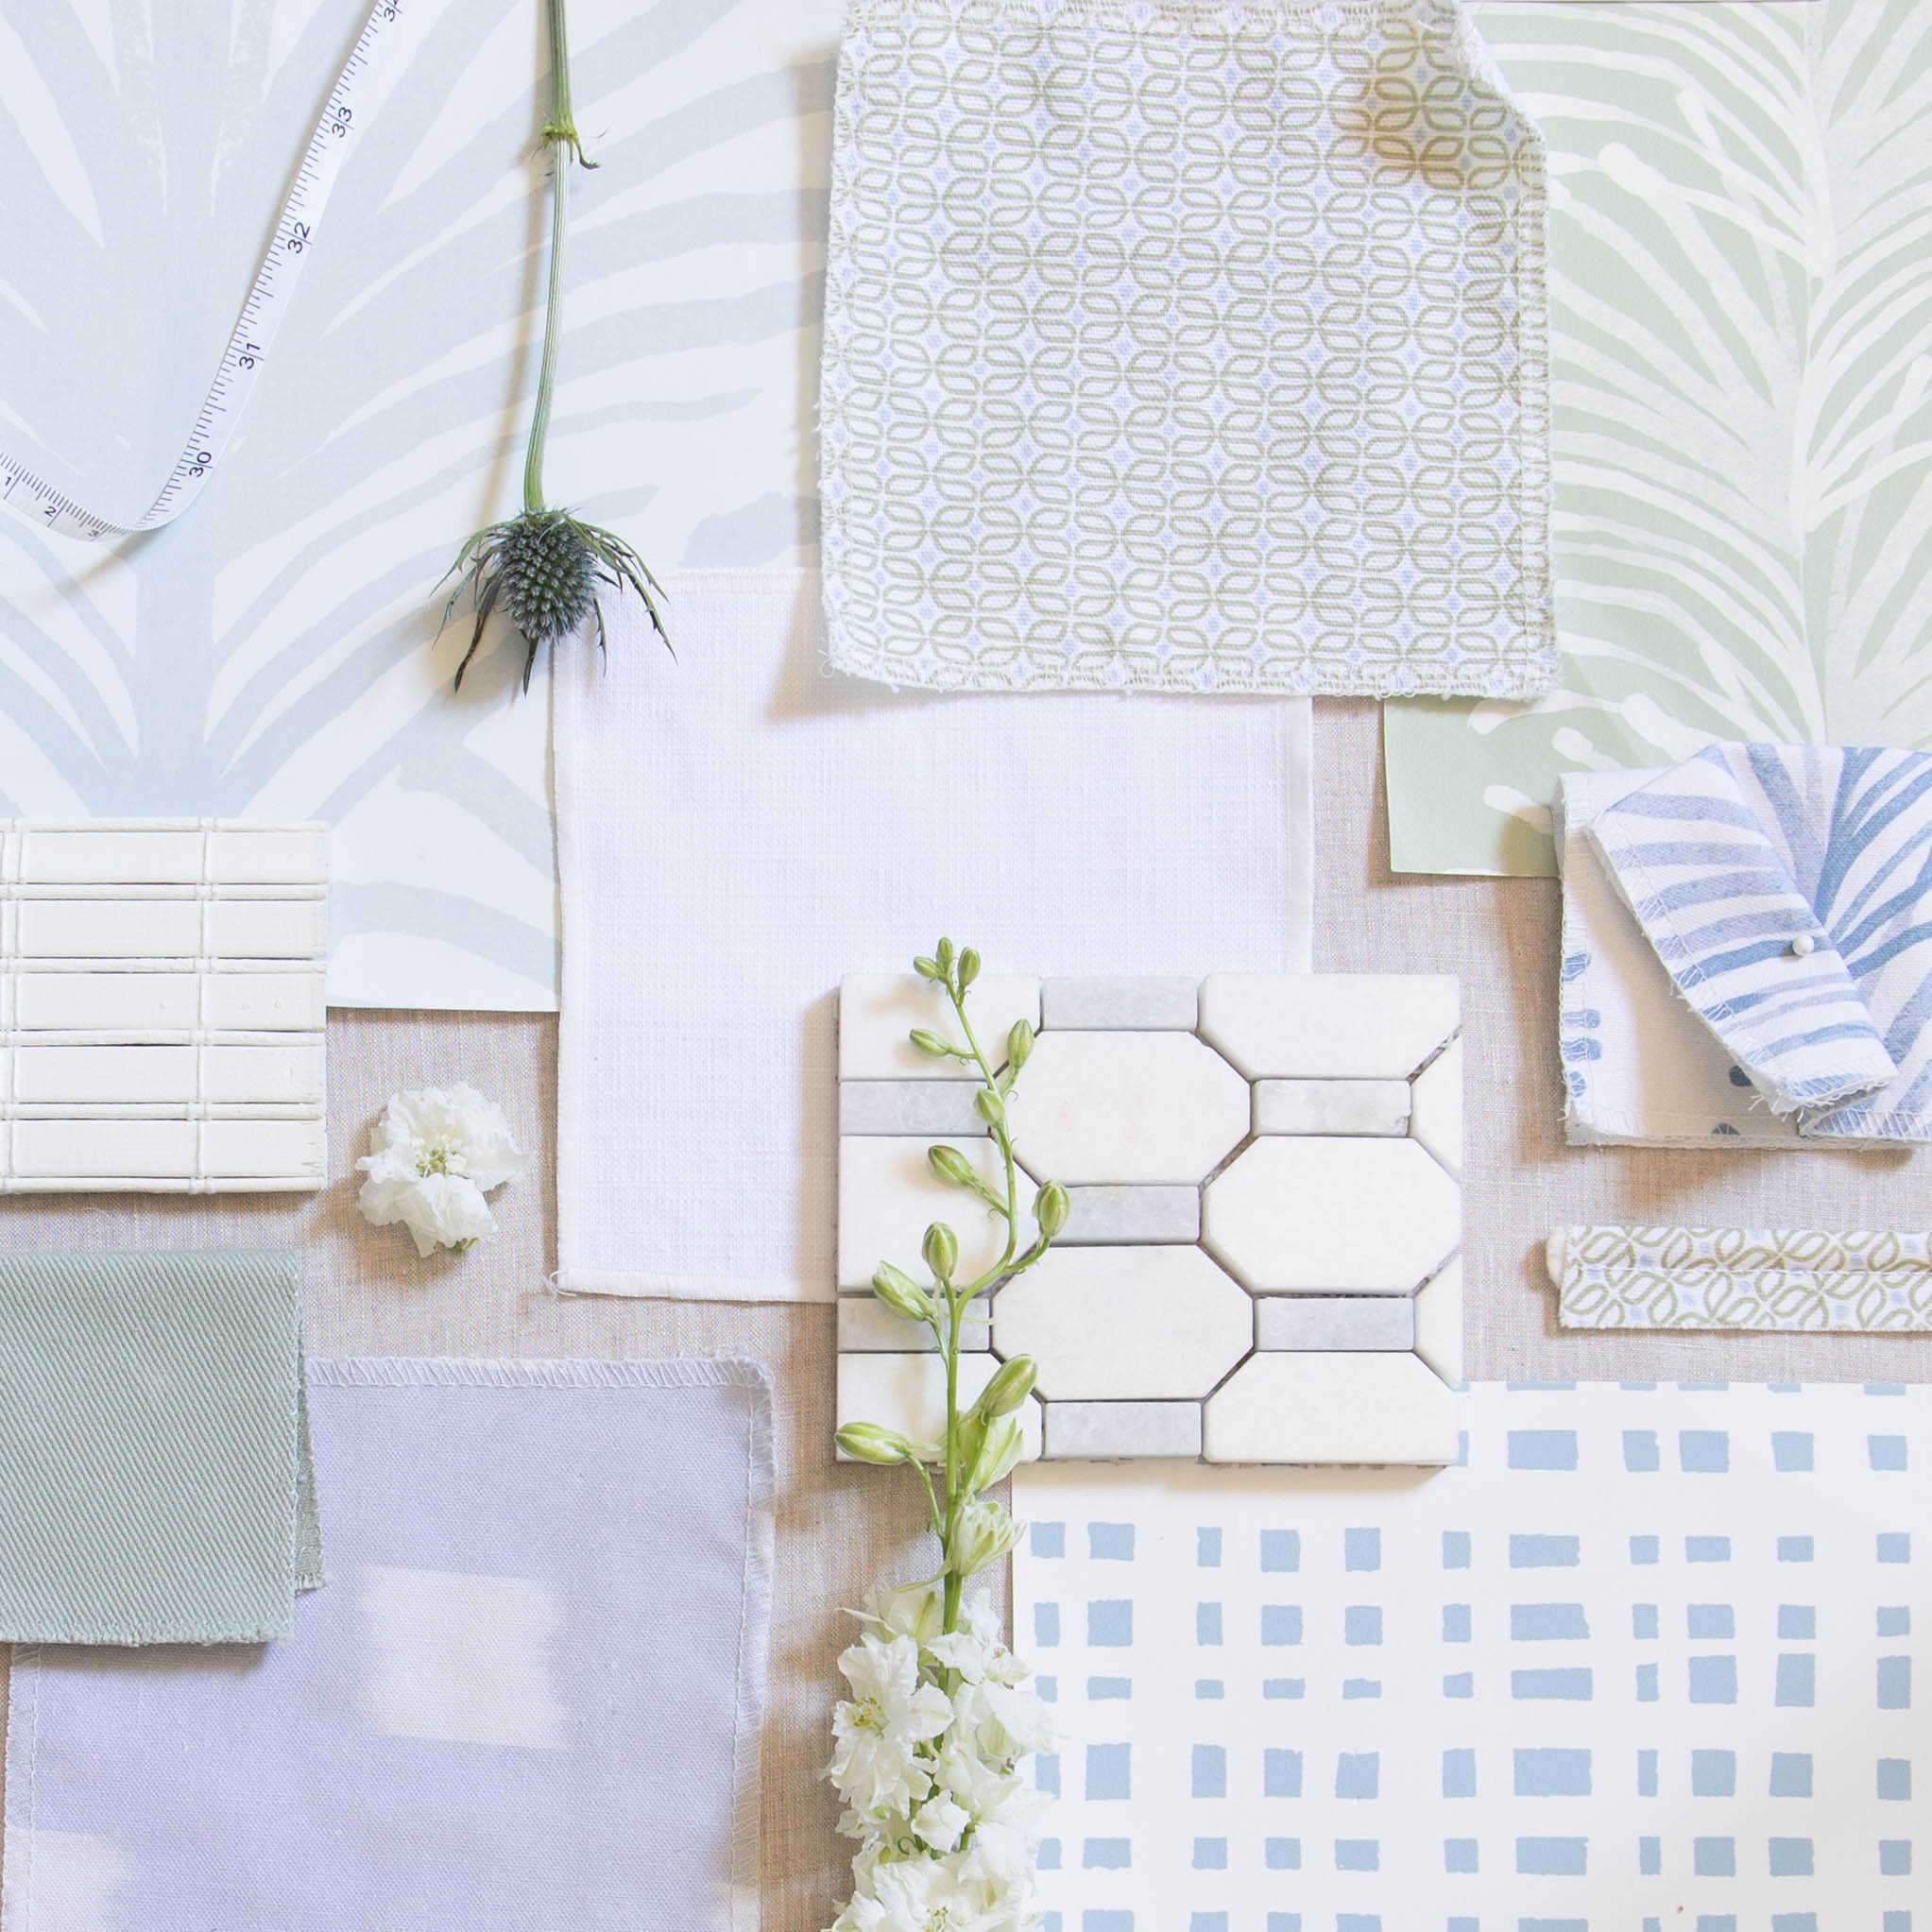 Interior design moodboard and fabric inspirations with Sky Blue Pattern Printed Swatch, Sky Blue Gingham Printed Swatch, Moss Green Geometric Printed Swatch, and Sky Blue Botanical Stripe Printed Swatch